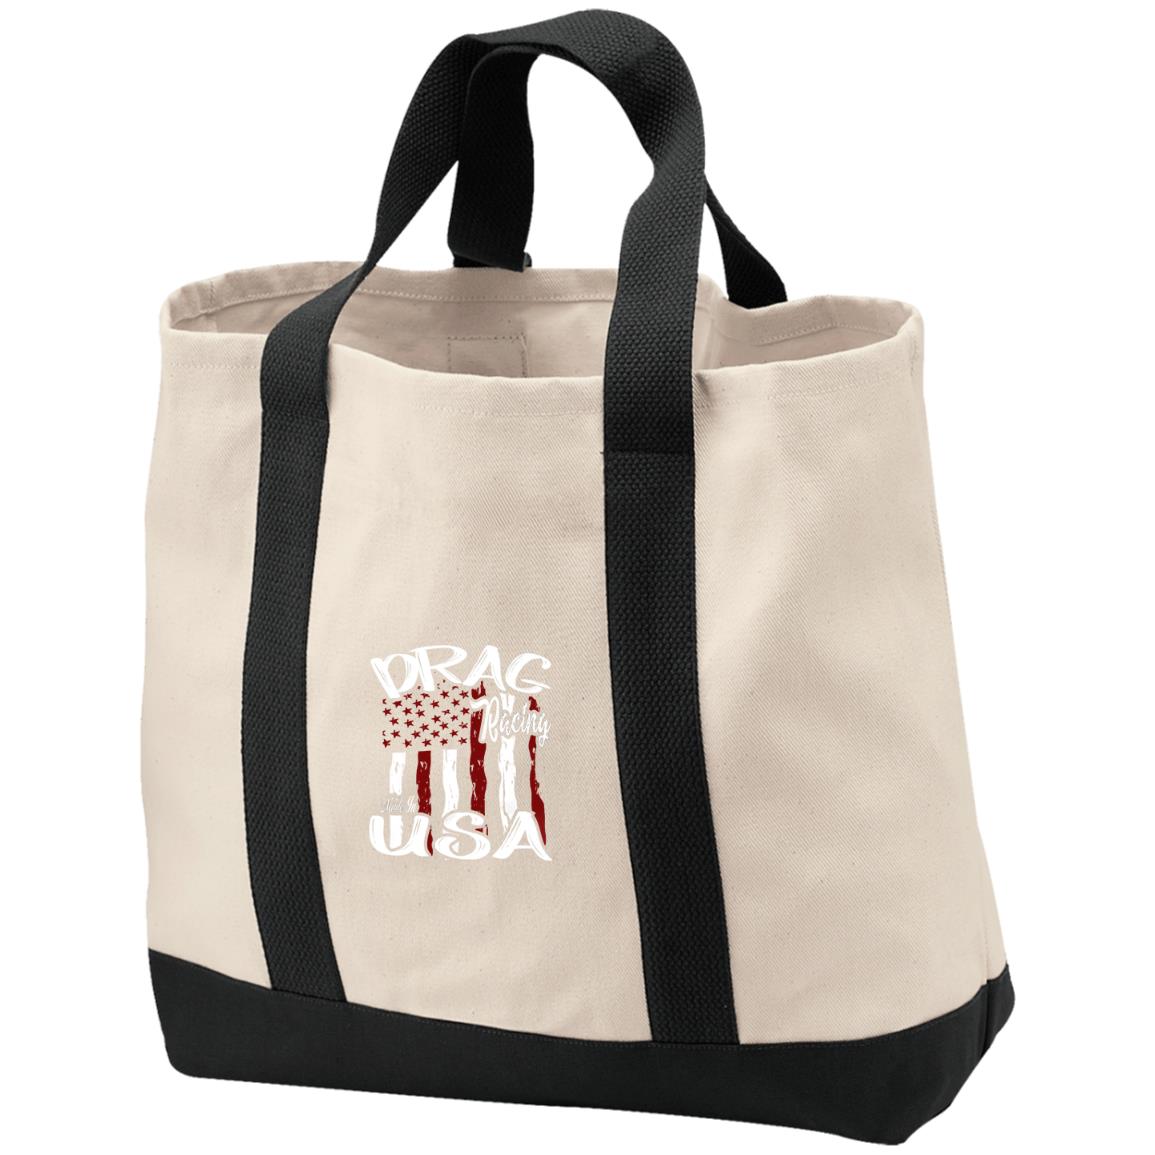 Drag Racing Made In USA 2-Tone Shopping Tote